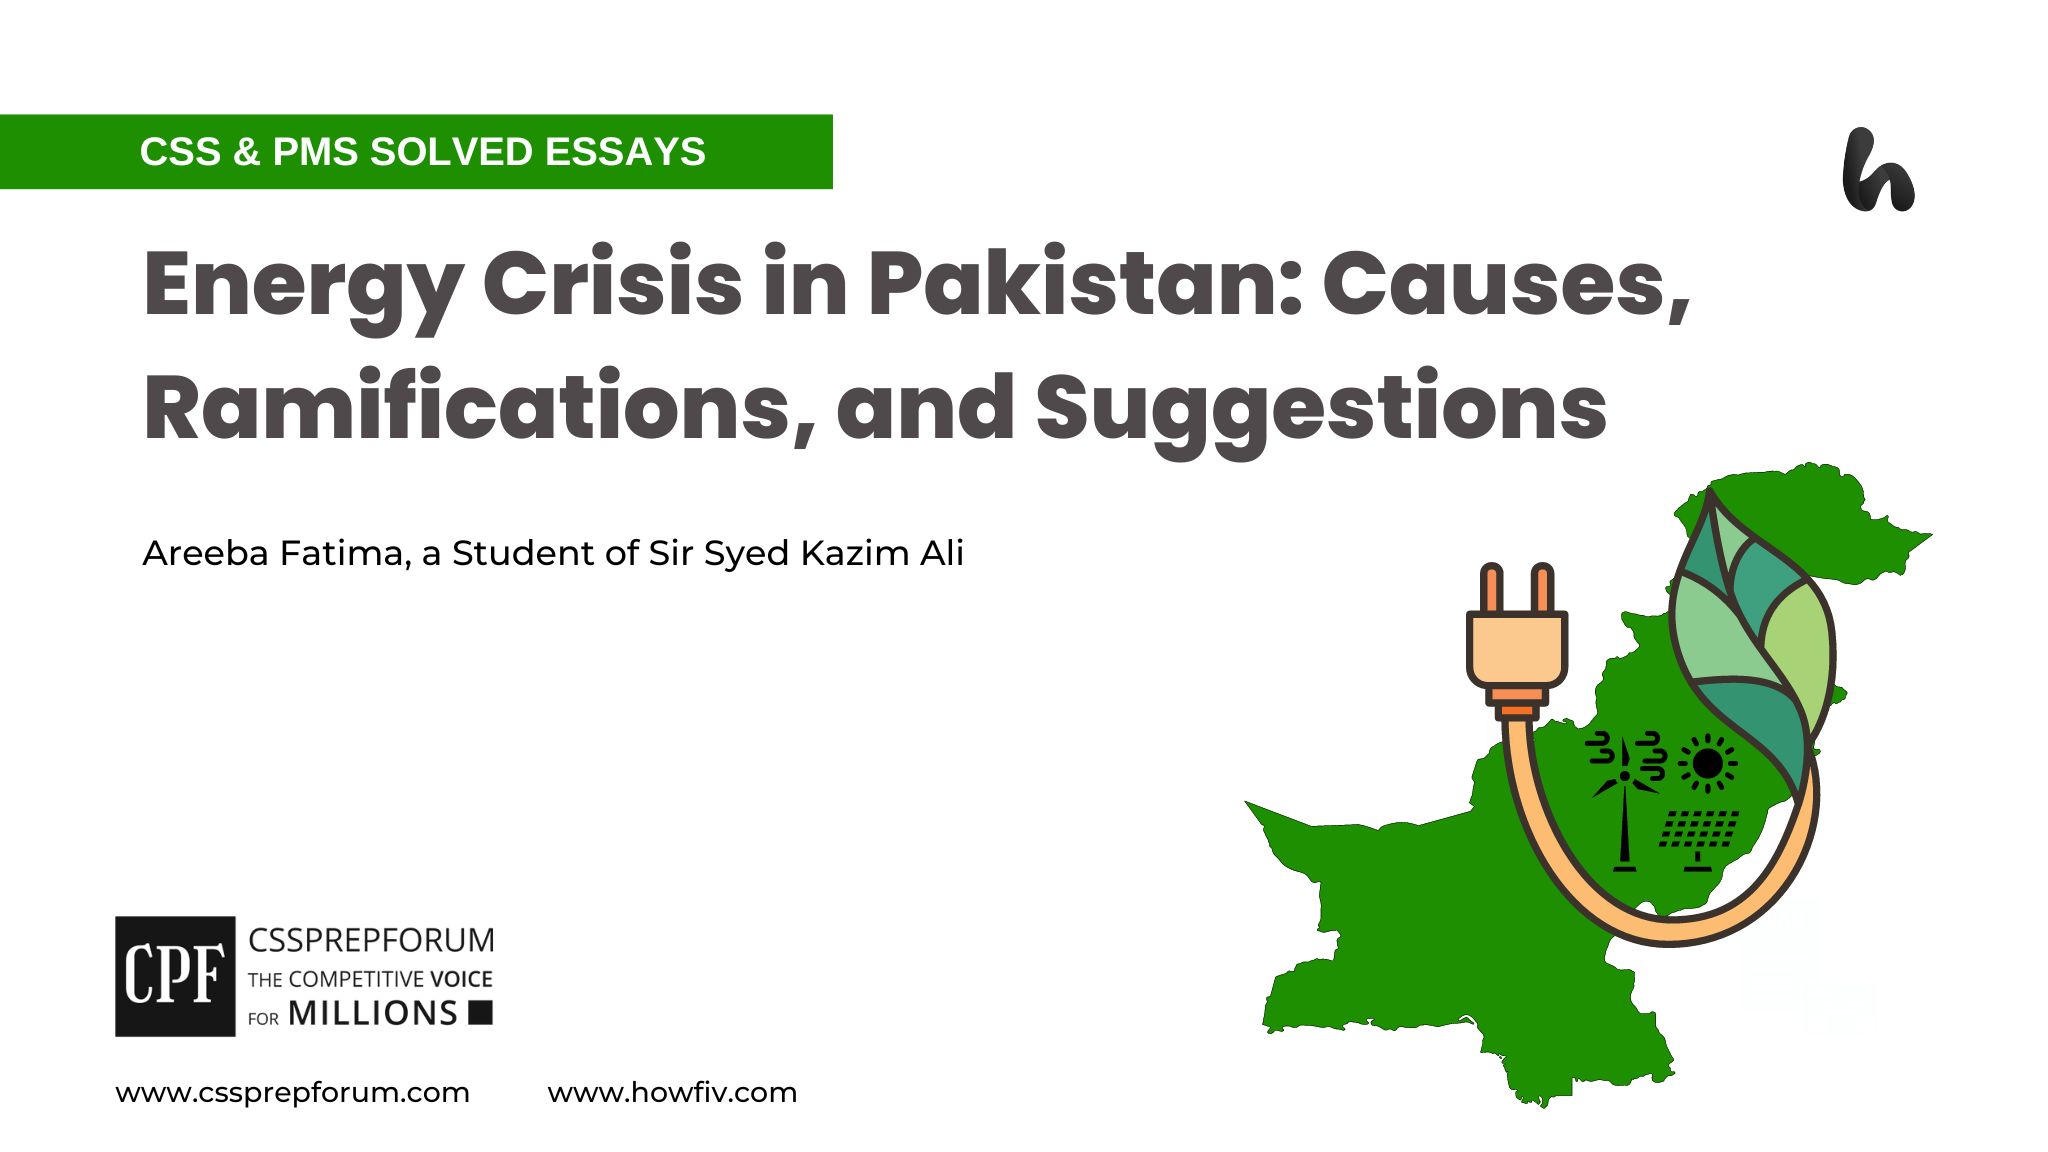 Energy Crisis in Pakistan: Causes, Ramifications, and Suggestions